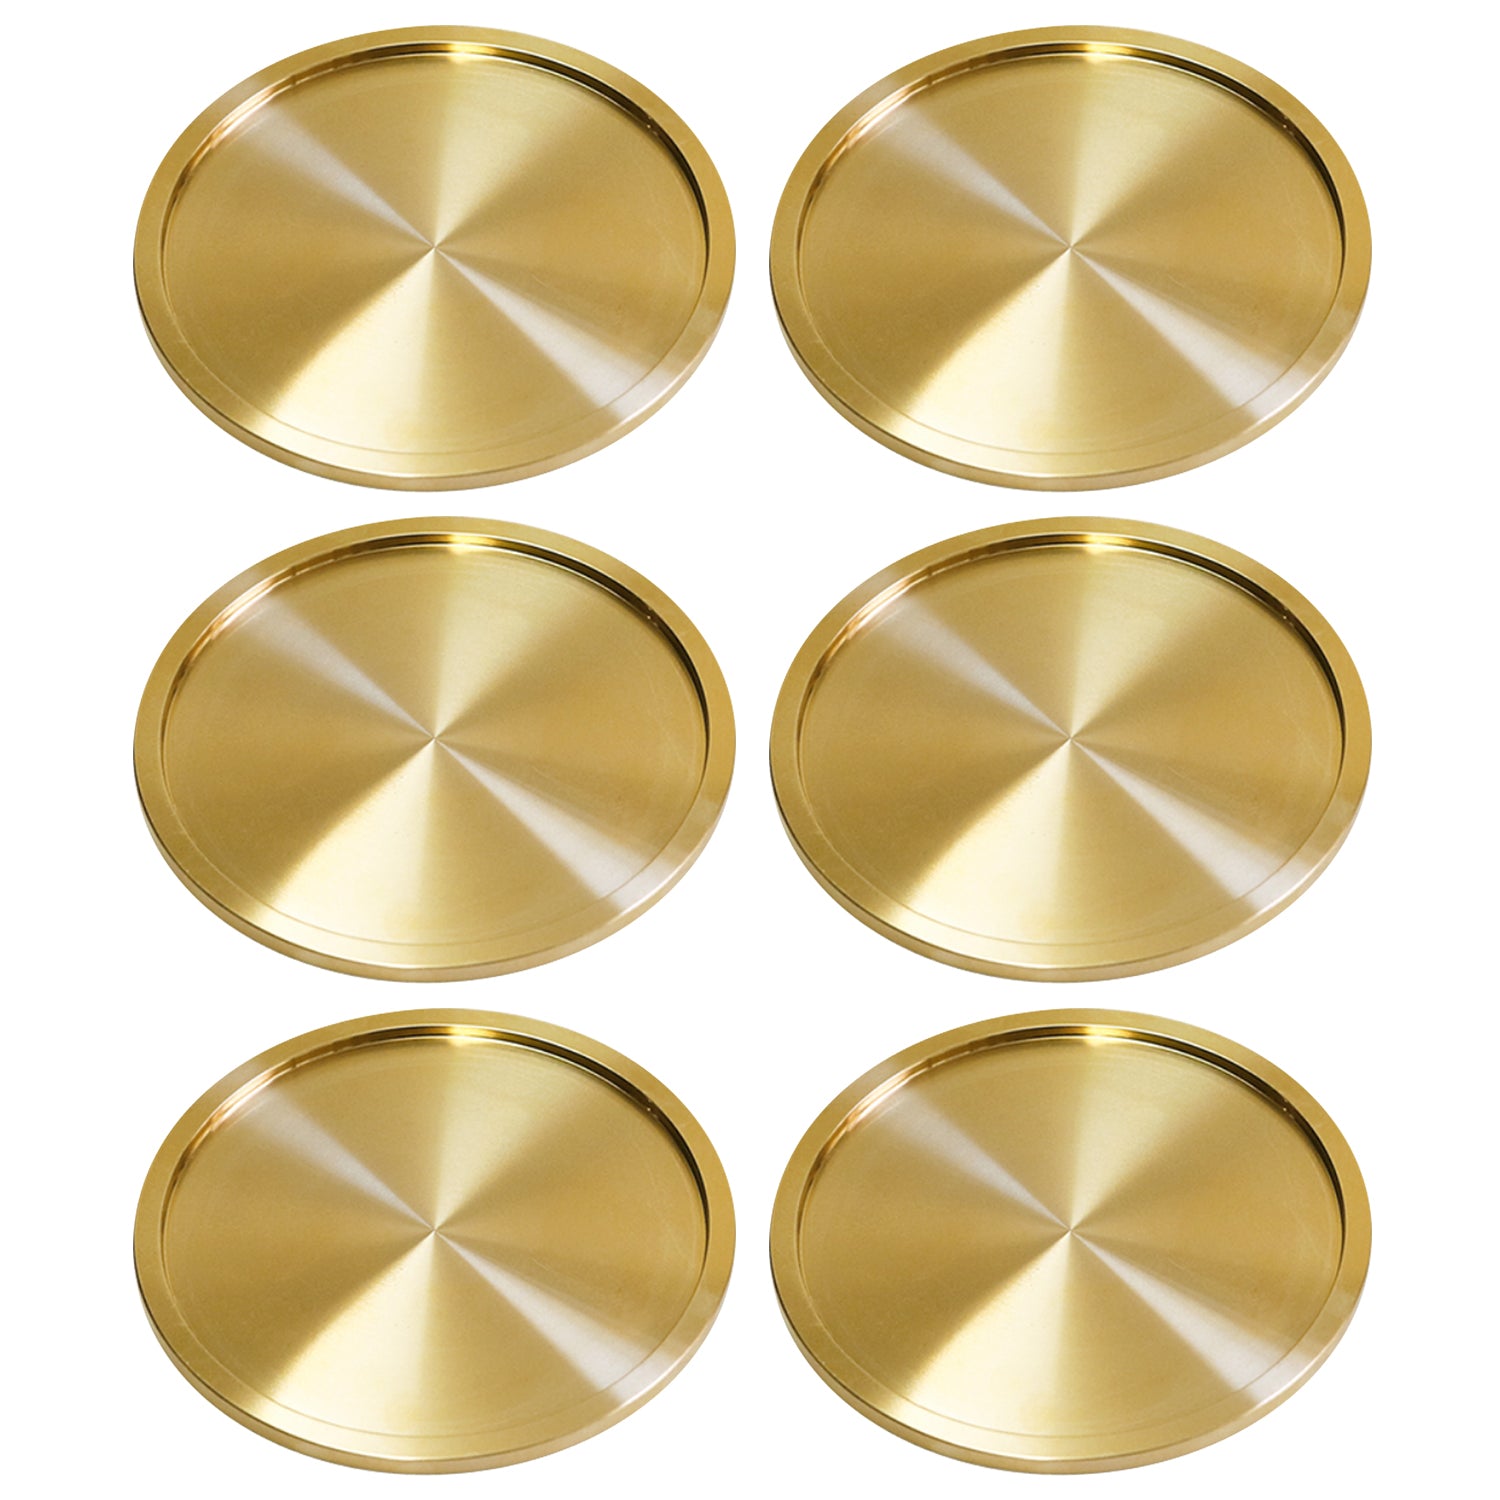 Brass Coasters for Drinks (6-Pack)